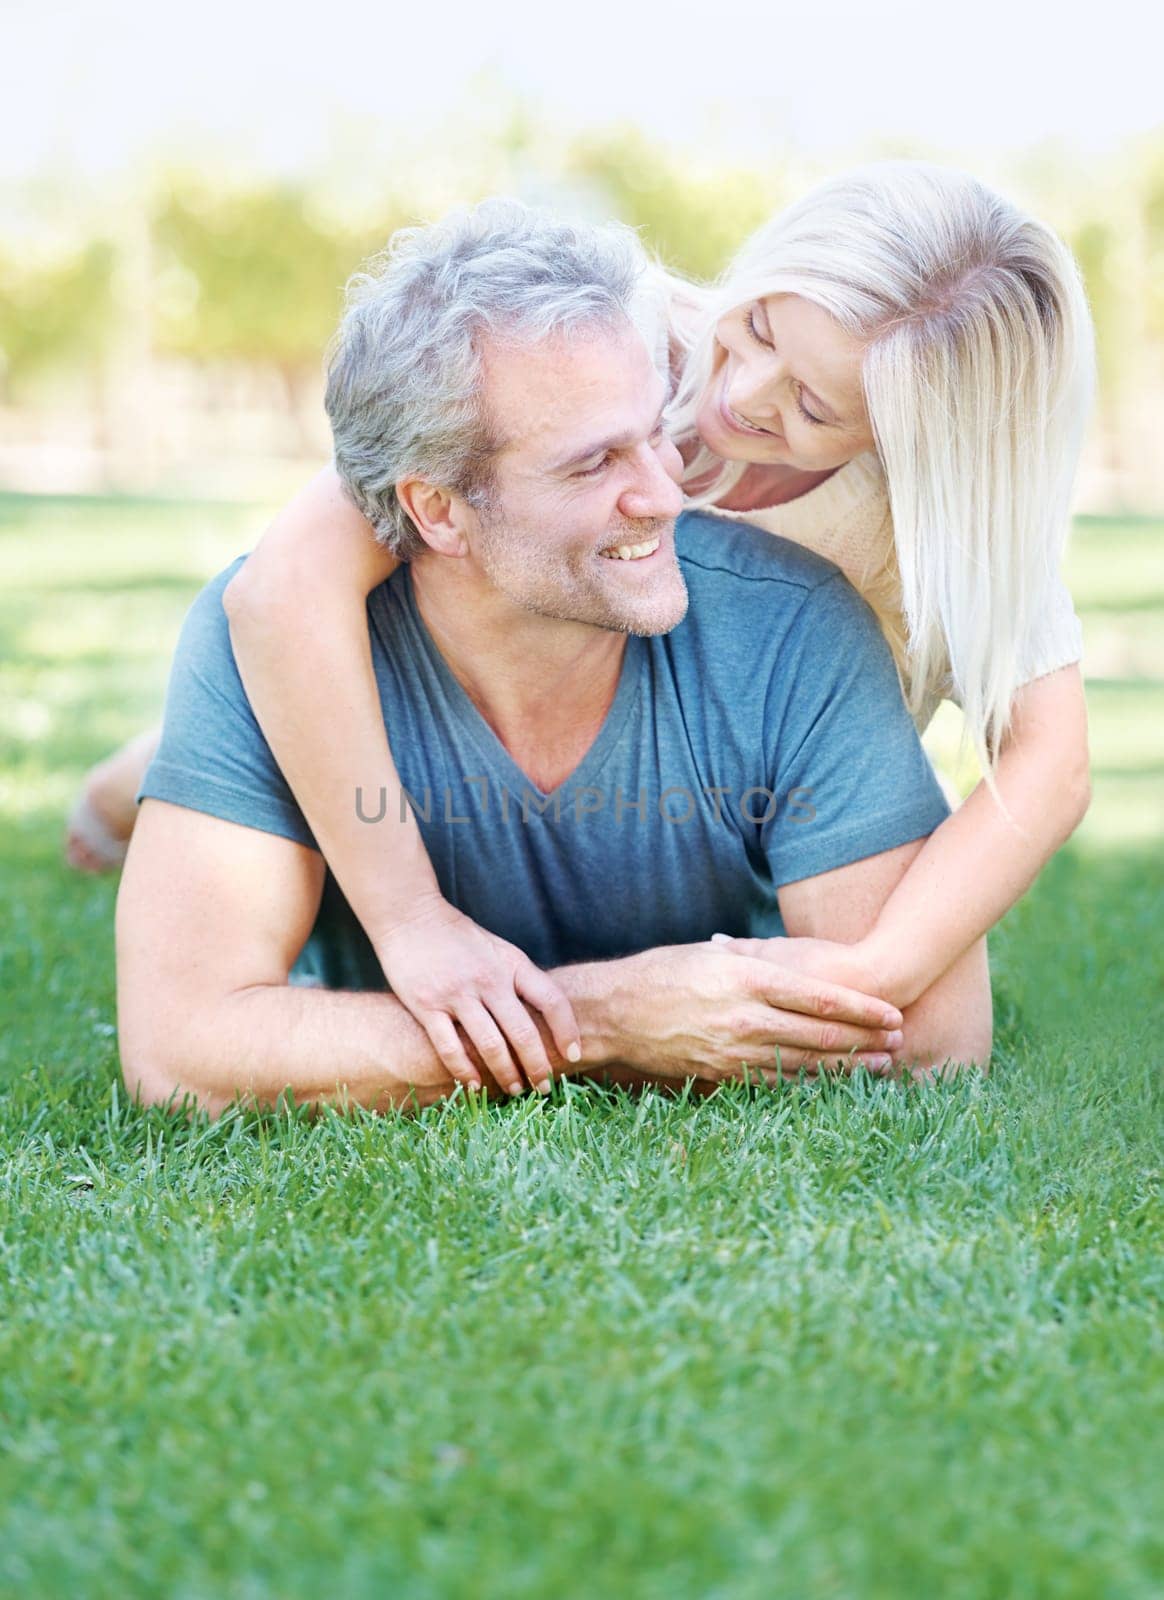 Happy, grass and senior couple in park for bonding, relationship and commitment outdoors on weekend. Love, retirement and mature man and woman embrace for romance, relaxing and marriage in nature.